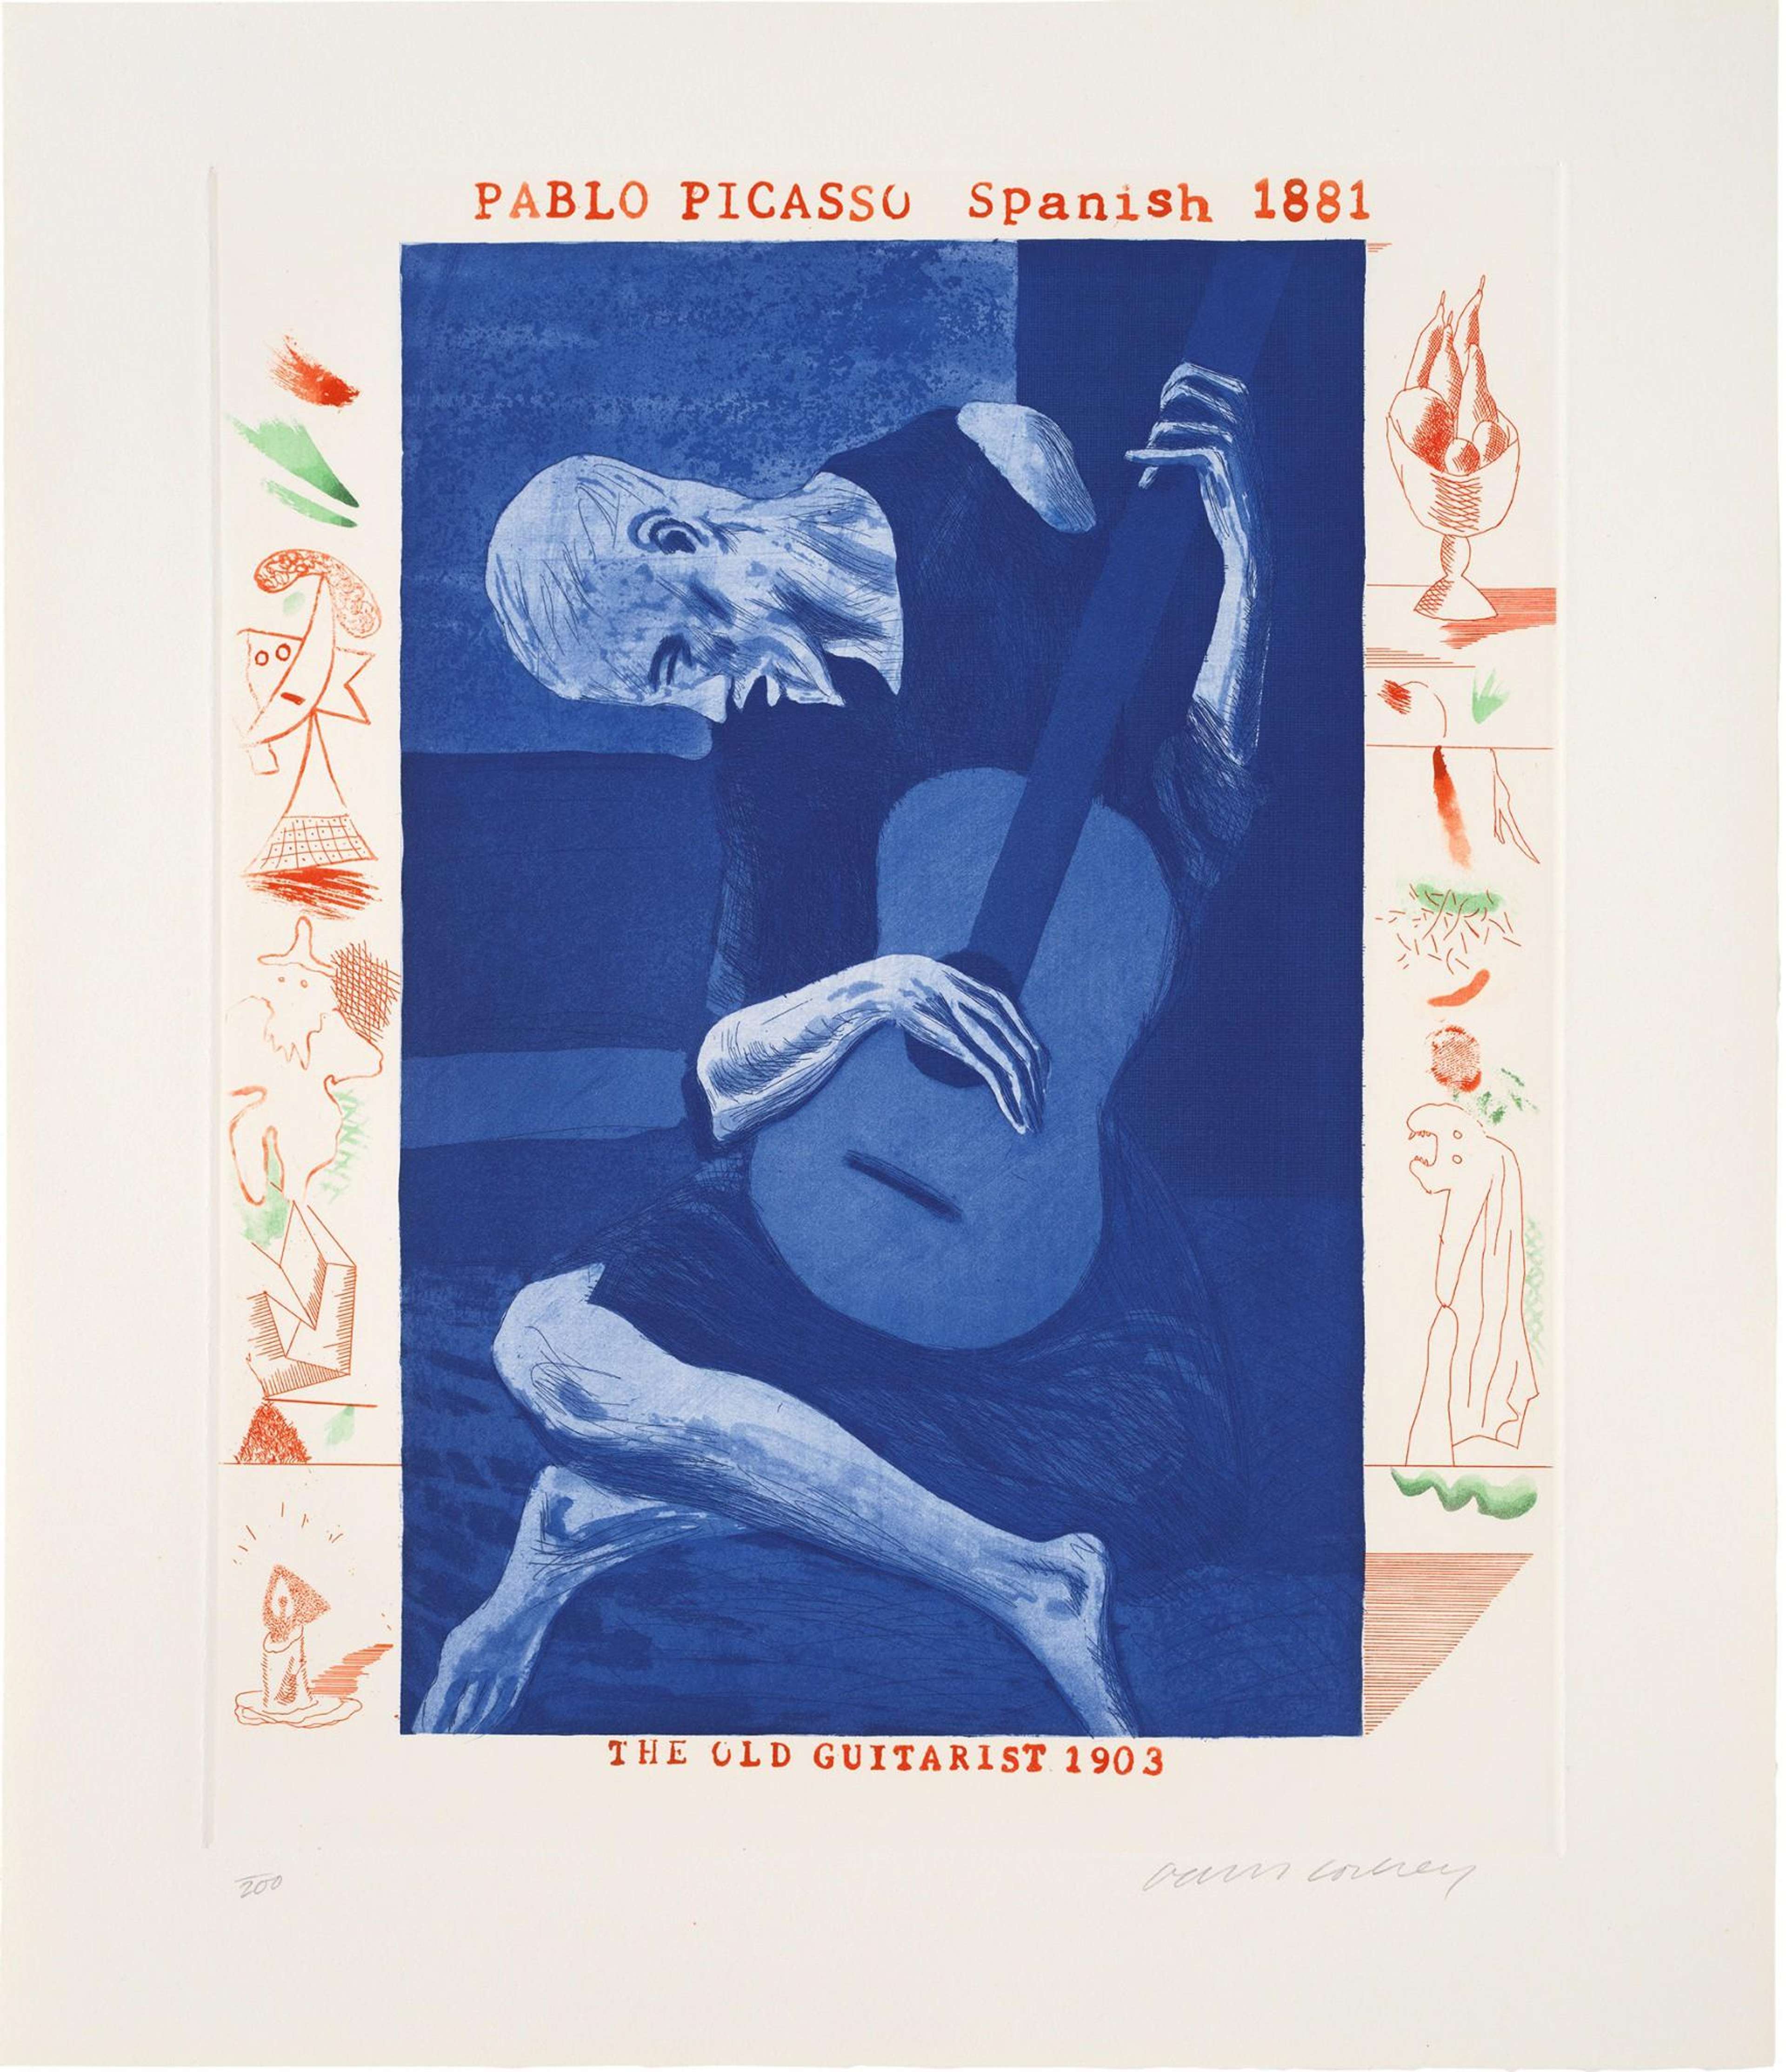 David Hockney’s The Old Guitarist. An intaglio print of Picasso’s The Old Guitarist with still life and abstract drawings around its perimeter. 